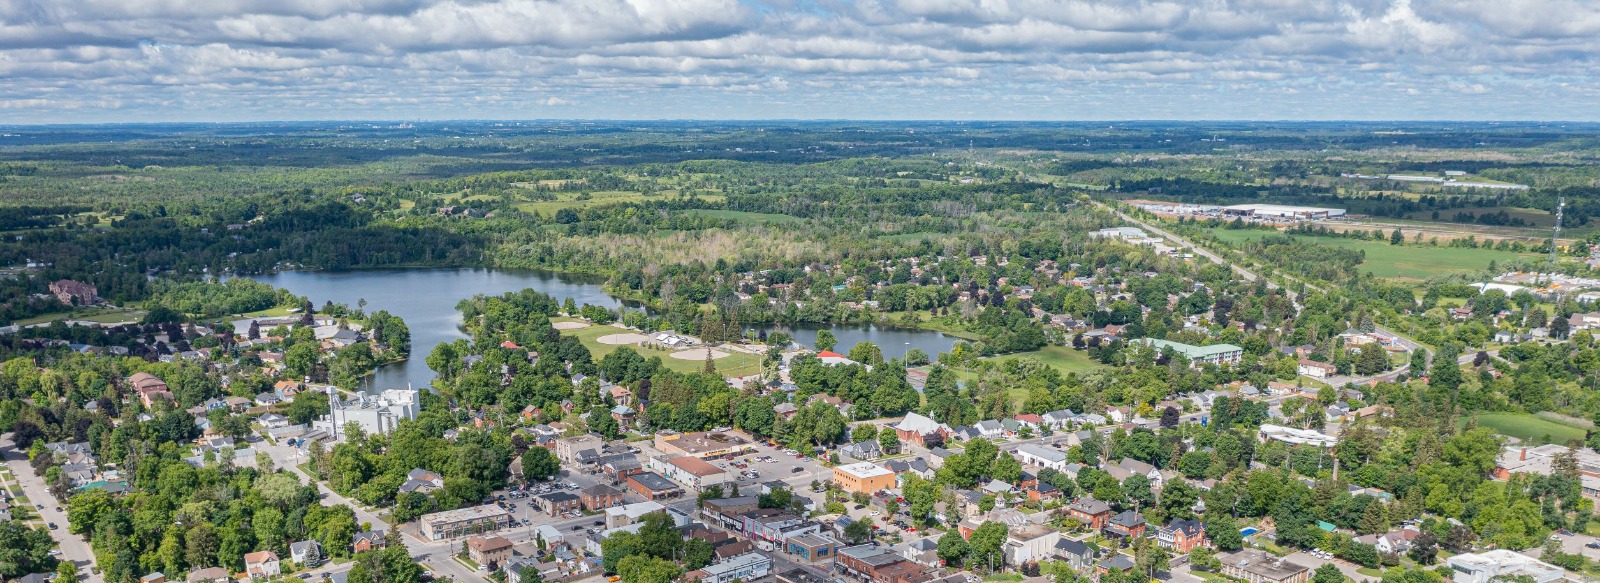 Aerial shot of Acton with lake, houses and clouds in the sky